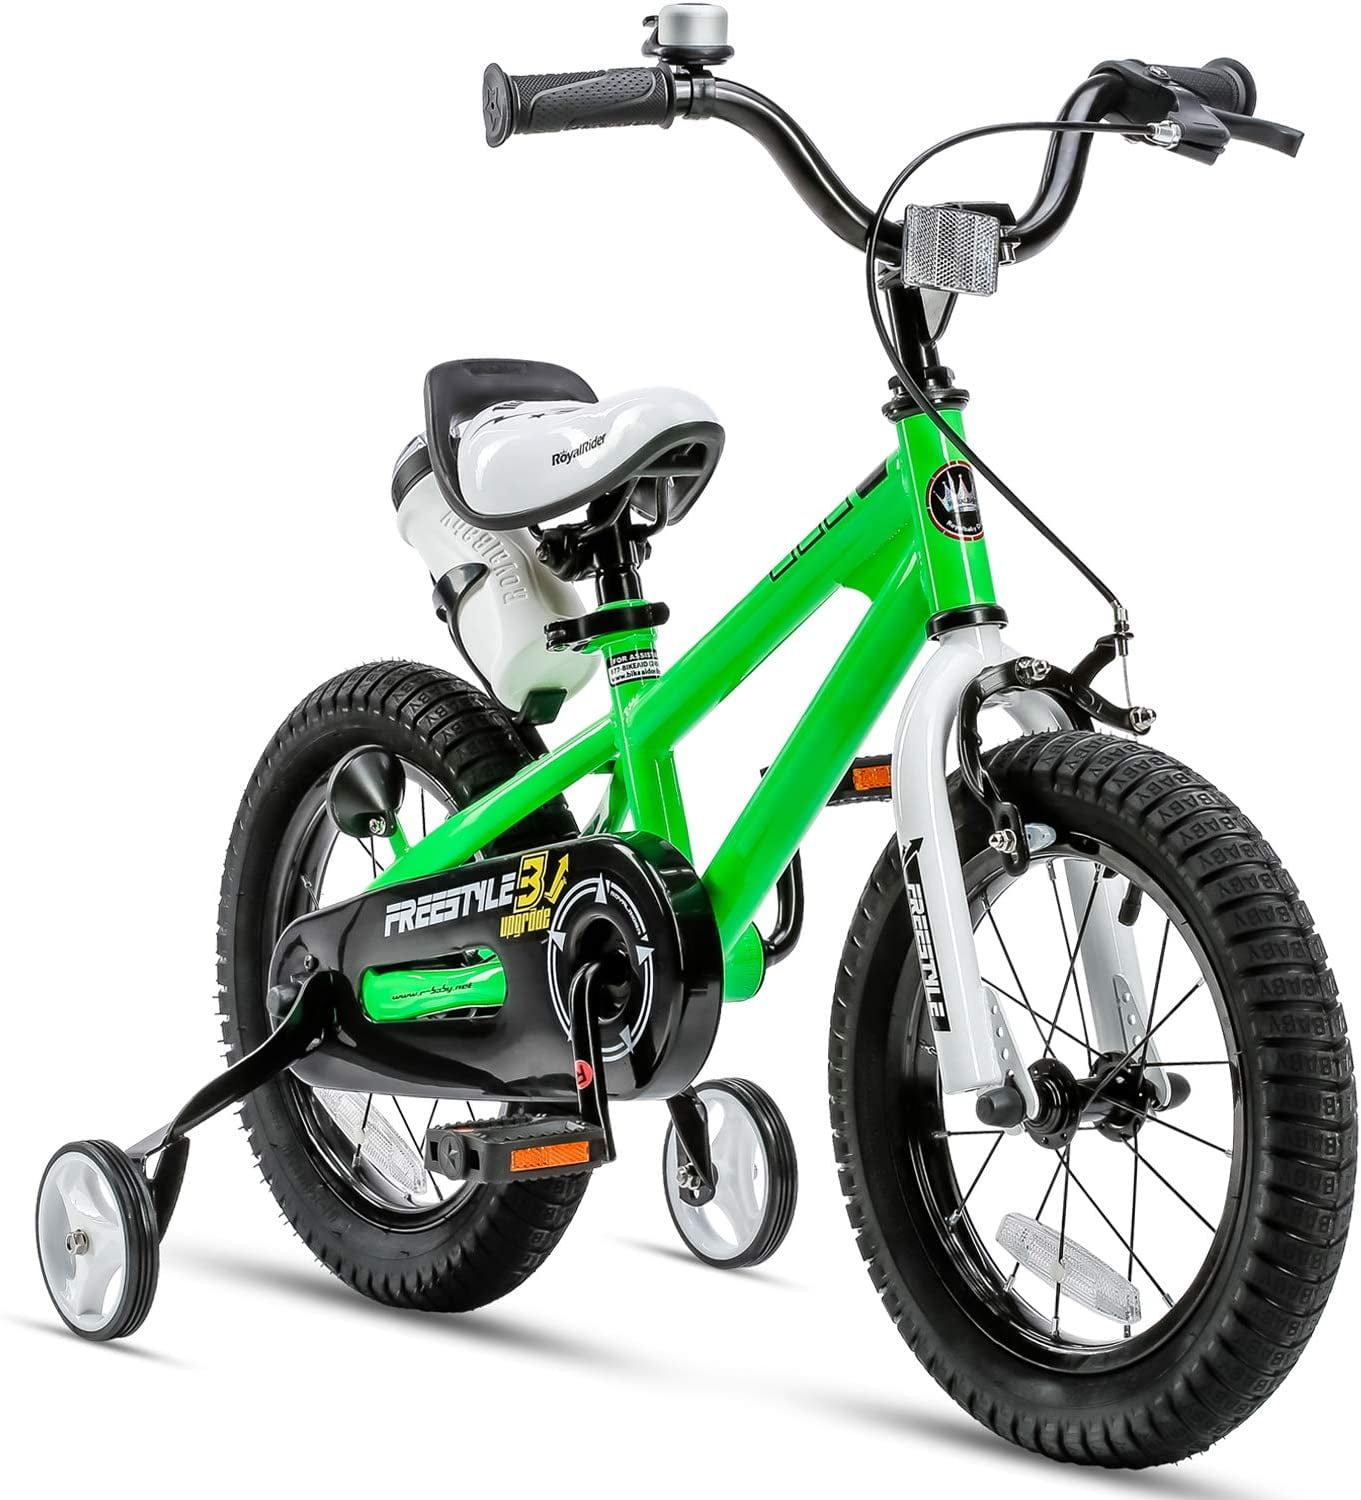 Toddlers Bike 14-In&16-In Wheels For Kids 5-7 Years Old 40-46 In Or 44-50 InTall 